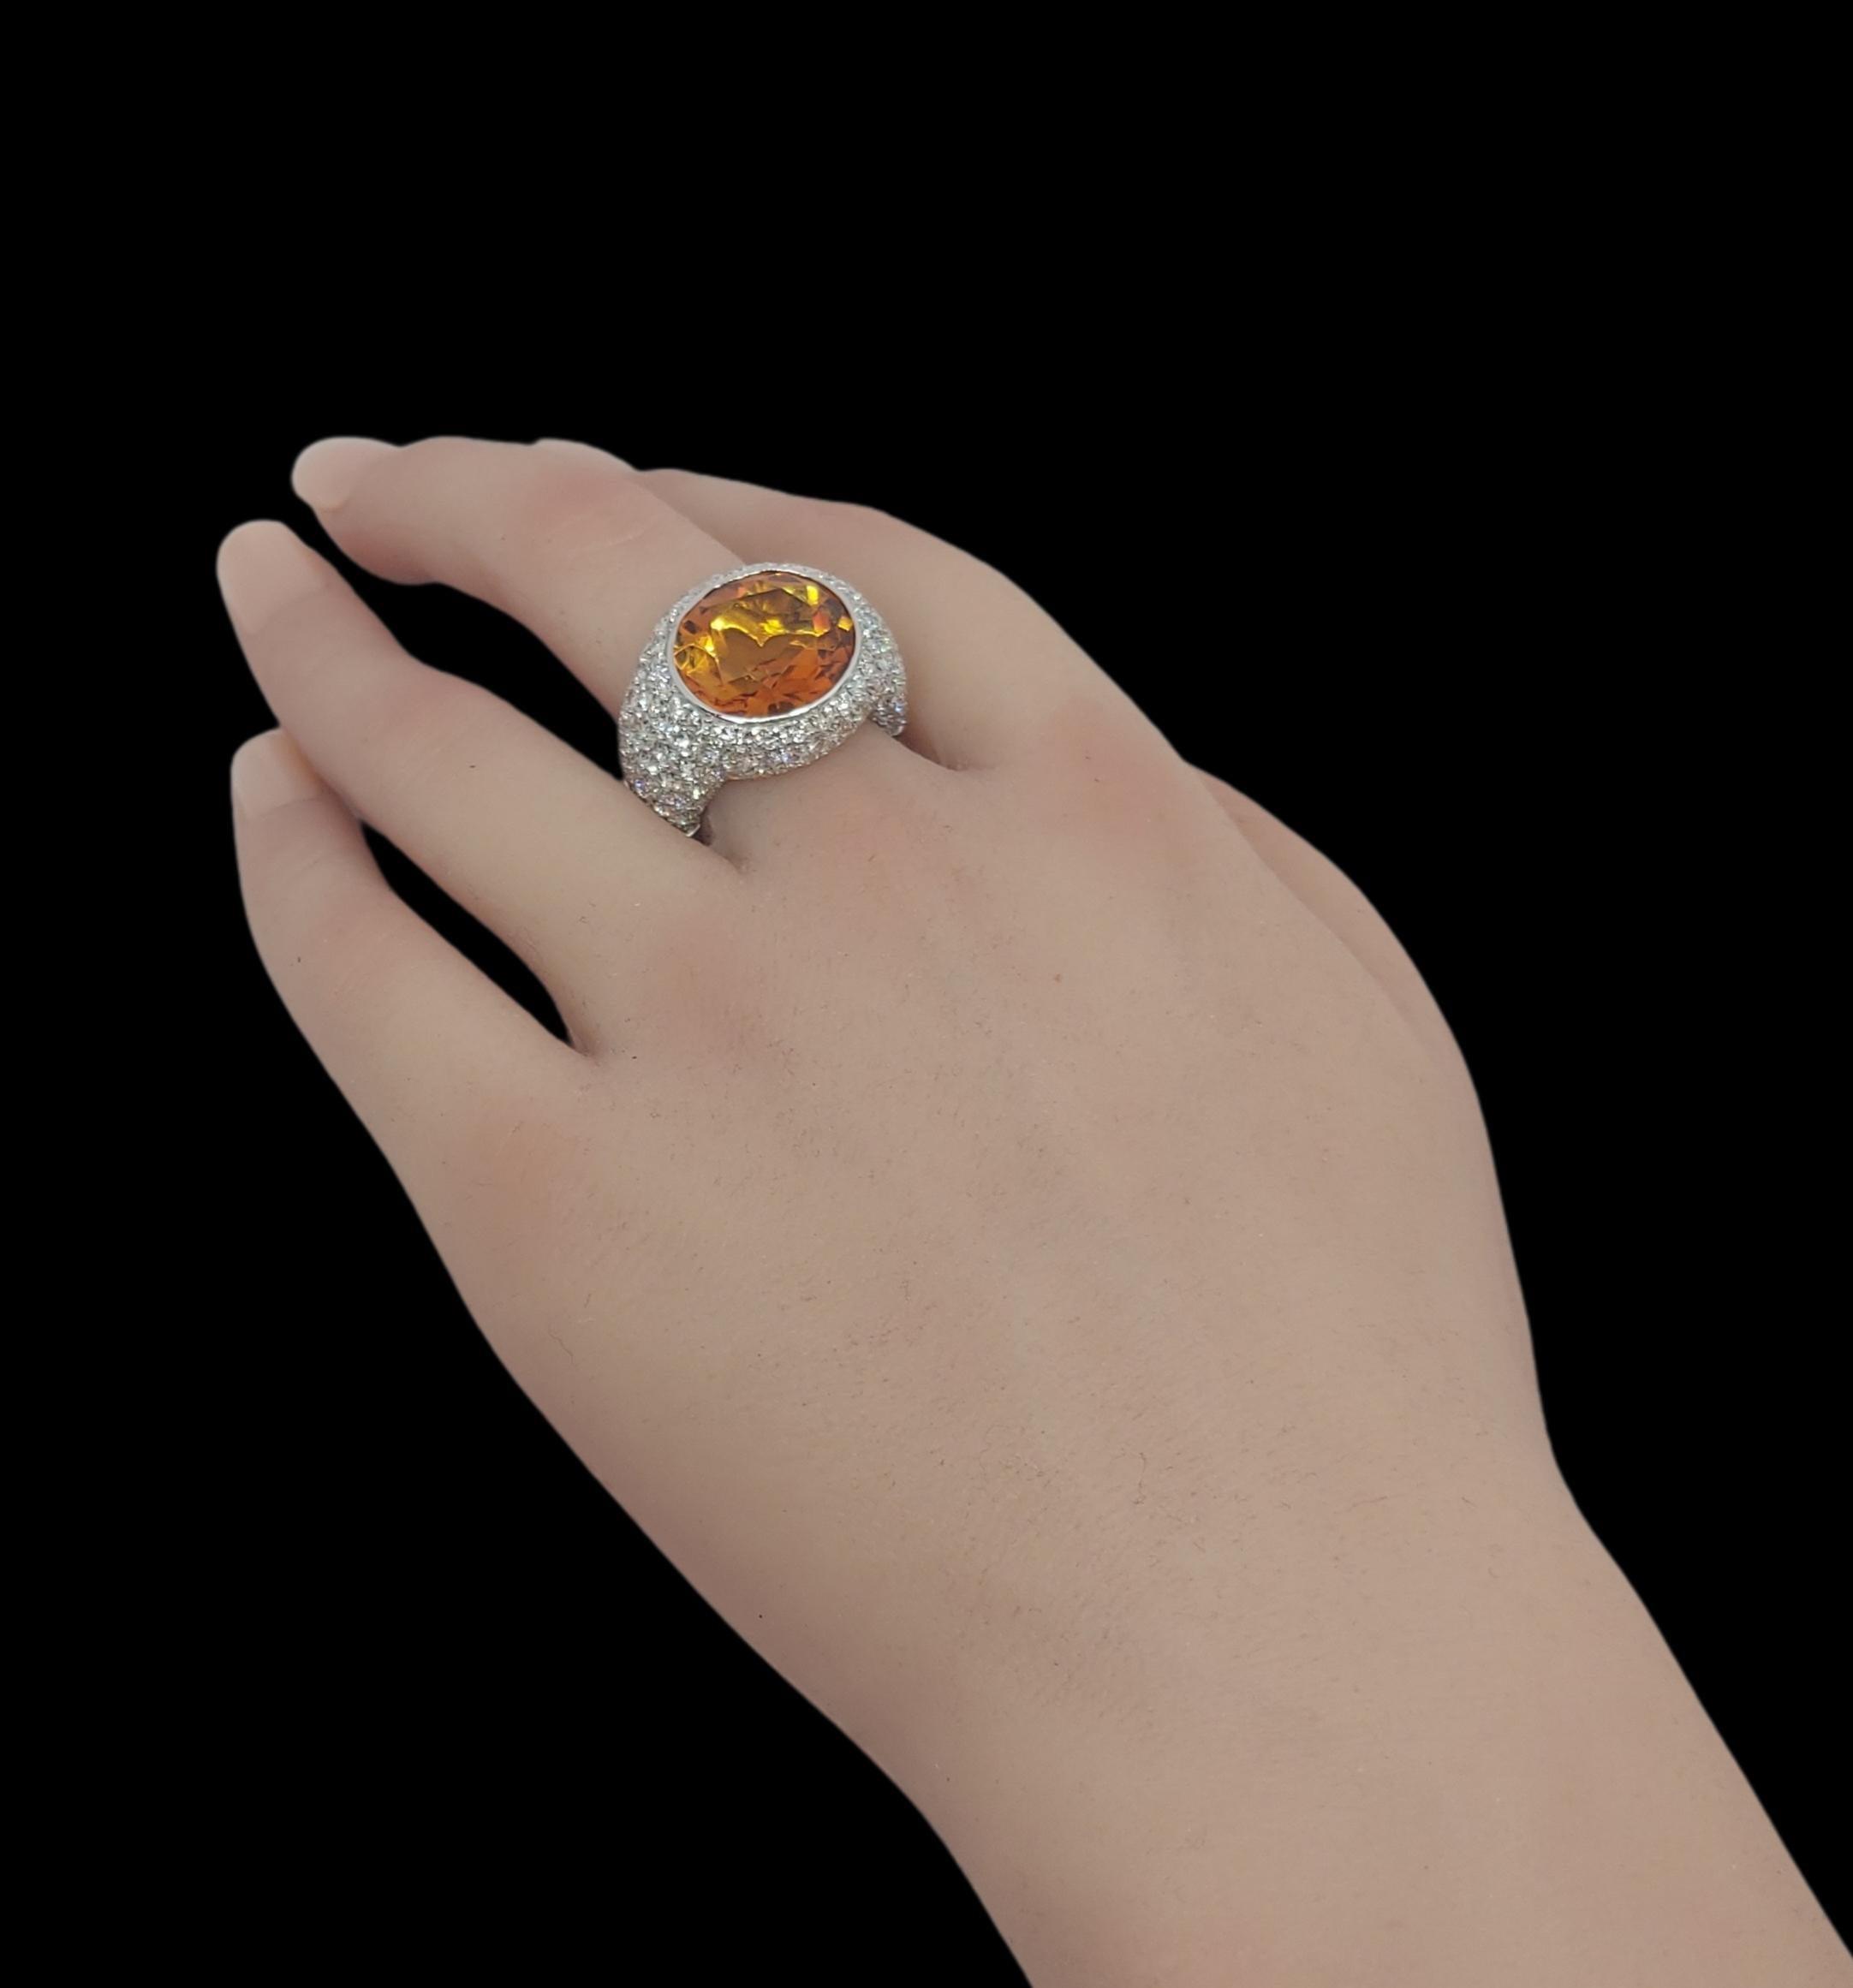 Stunning 18kt Solid White Gold Ring with 6.4ct Diamonds and Big Citrine Stone For Sale 6